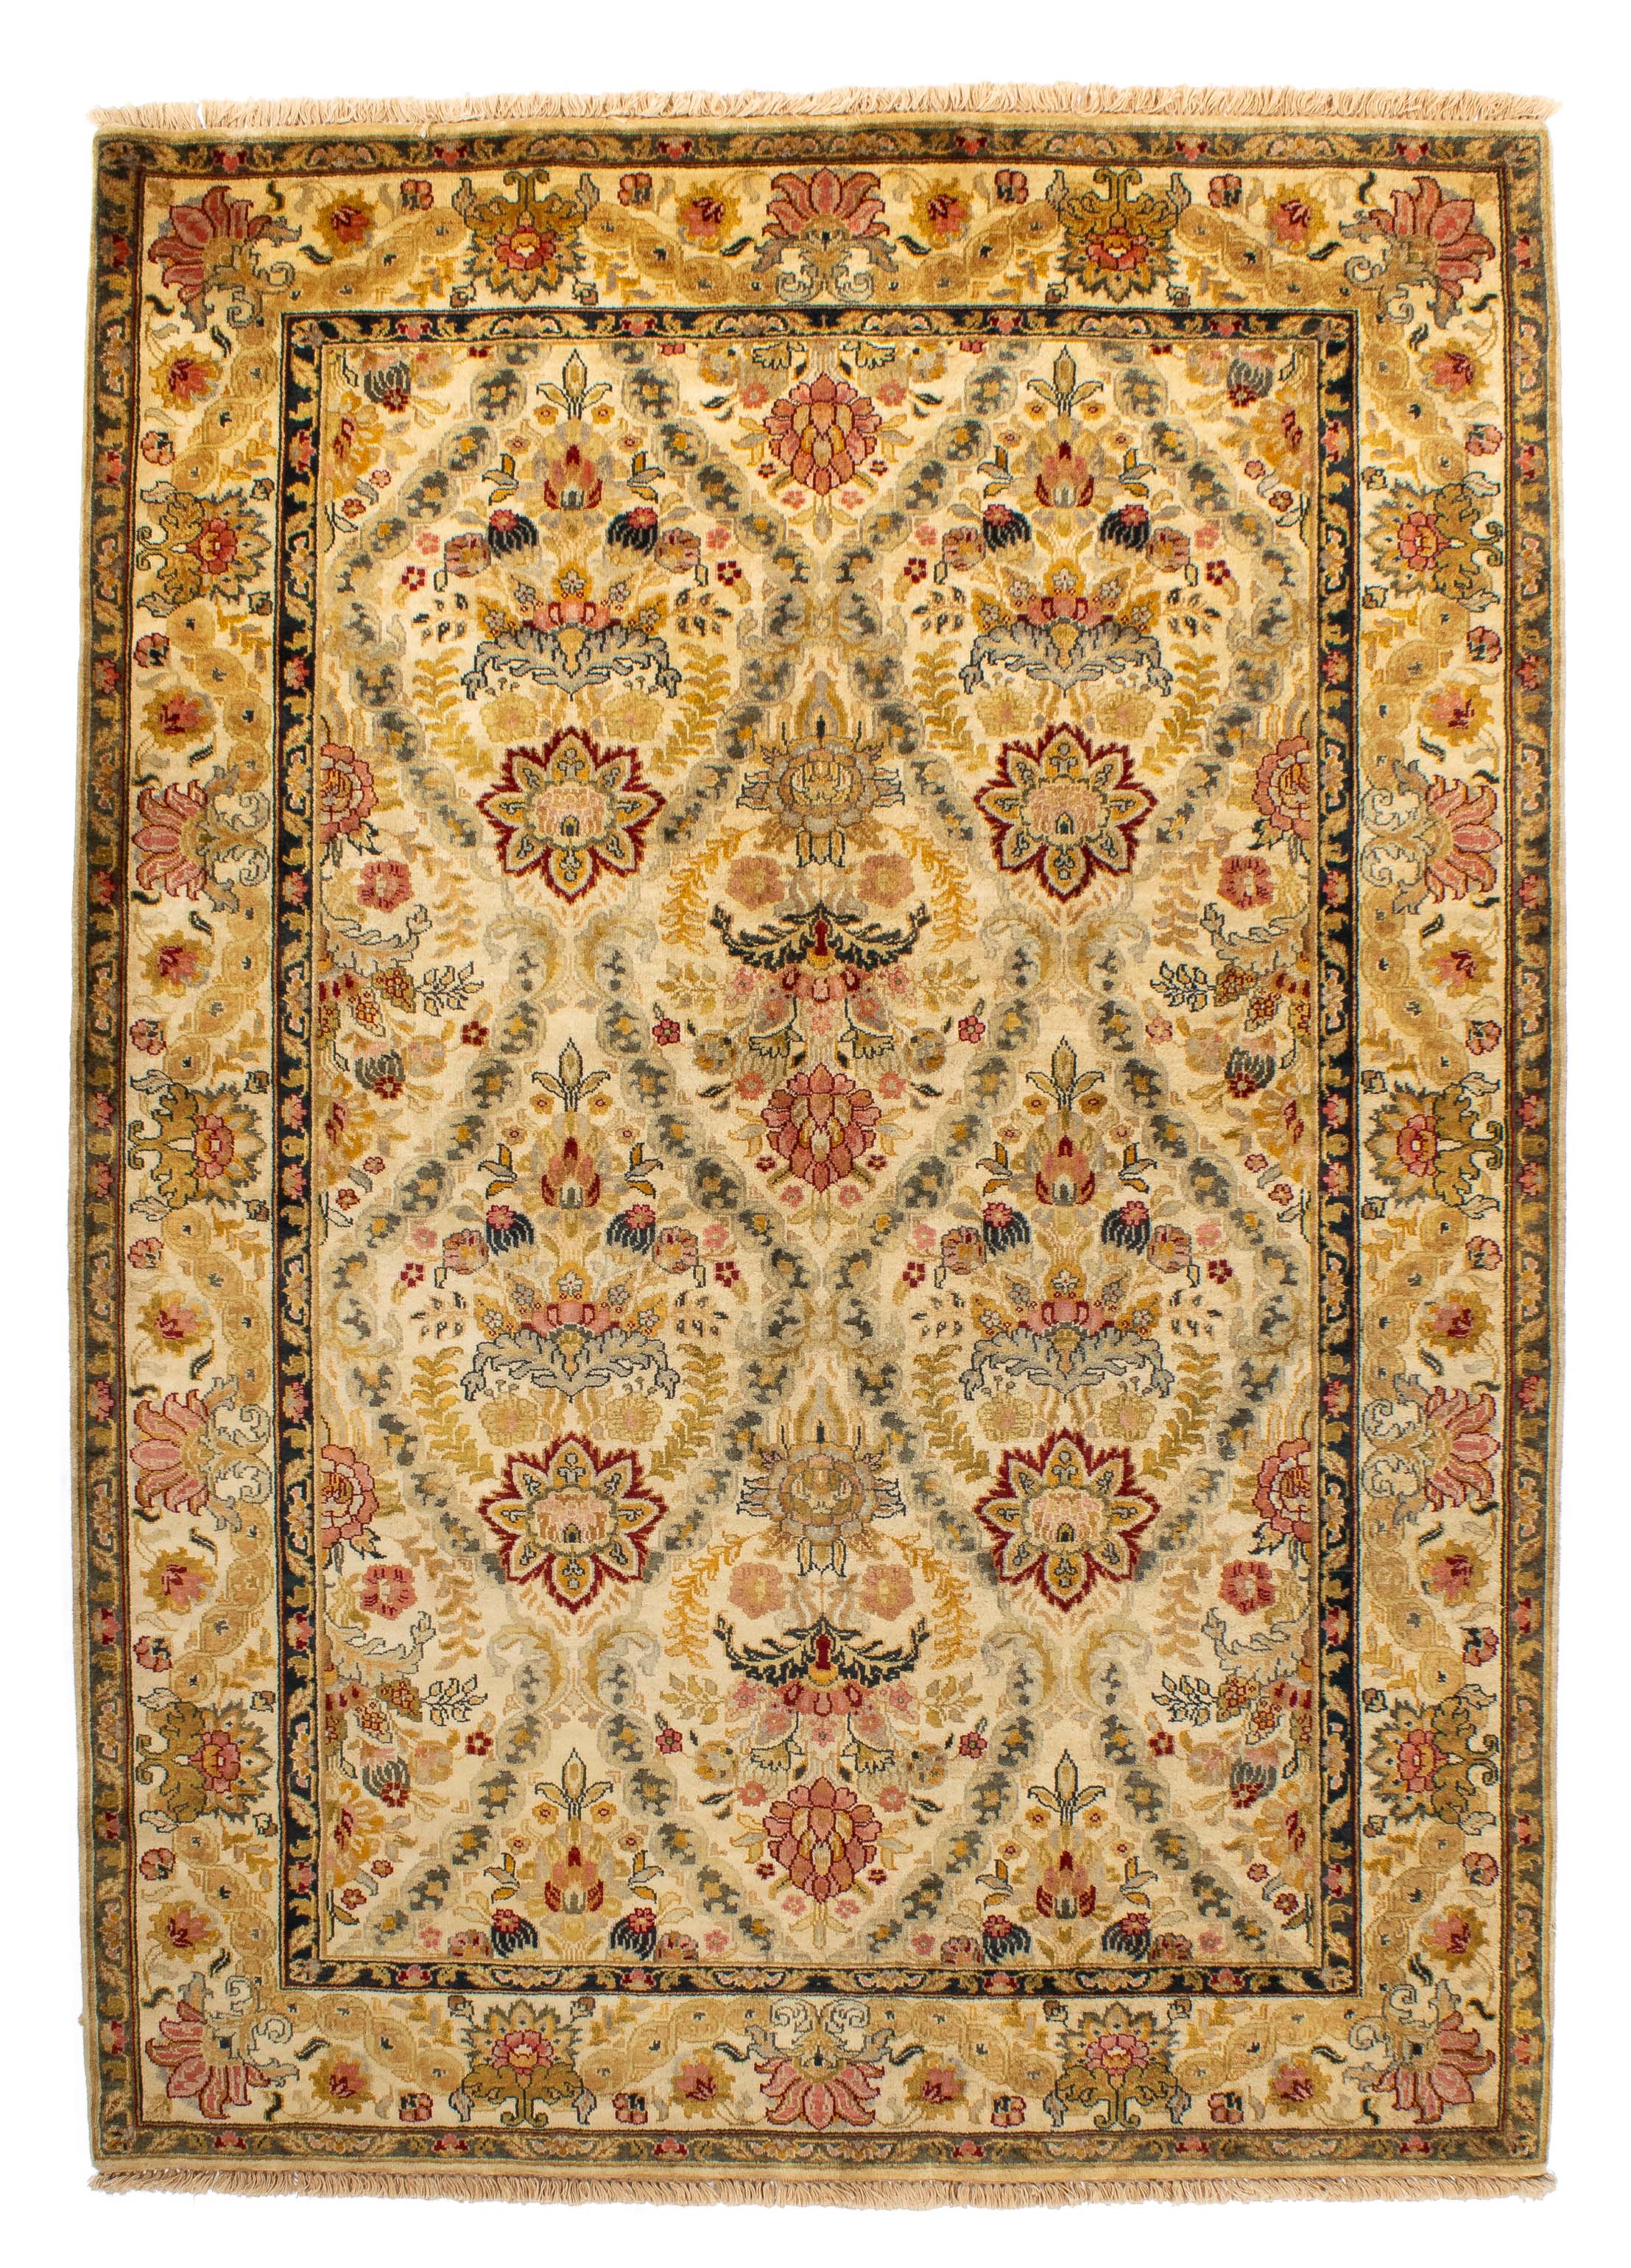 New Indian Classic Rug <br> 5'1 x 7'1